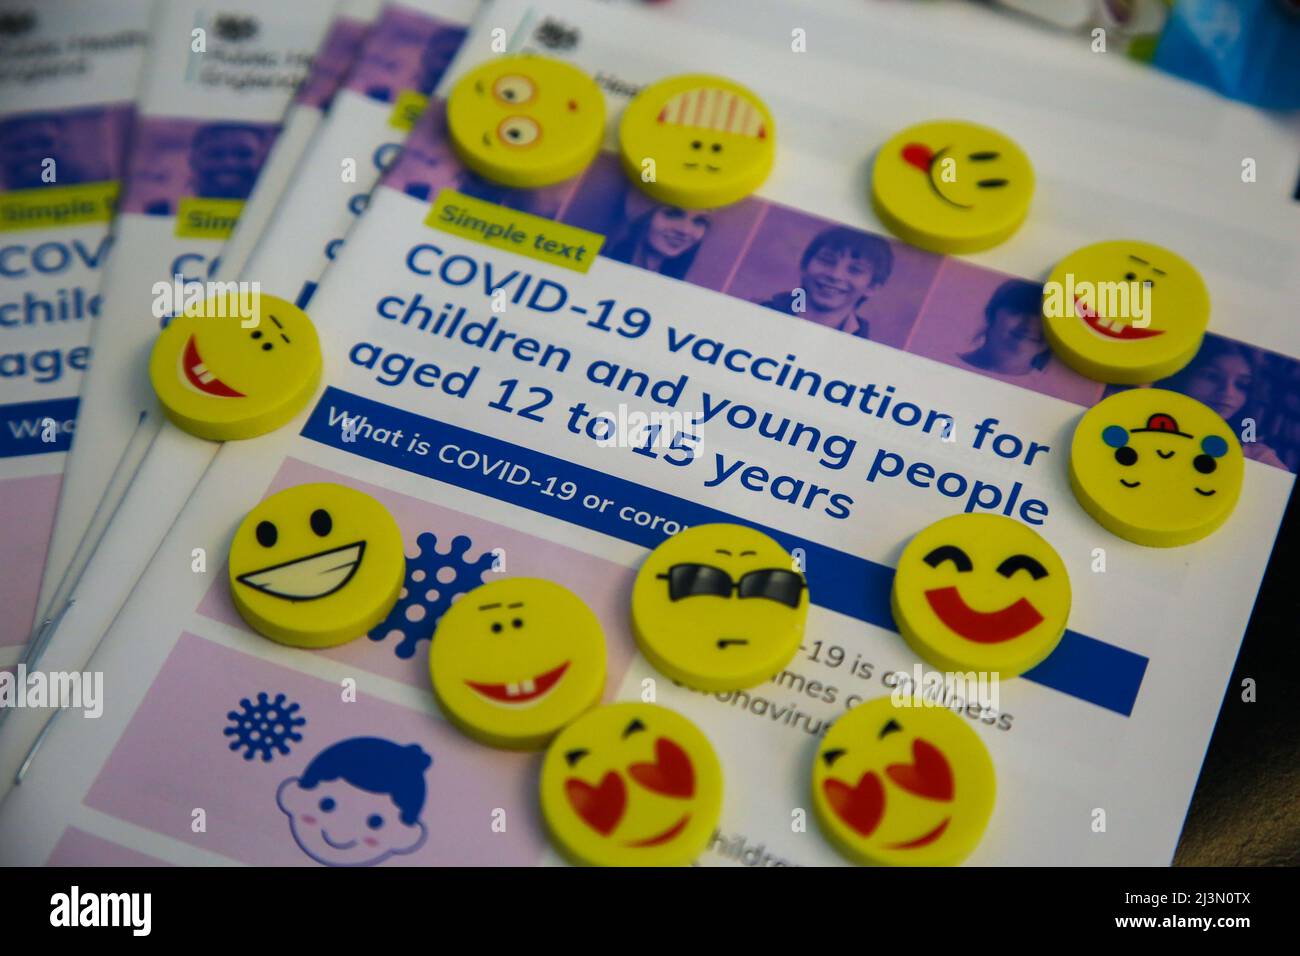 London. UK 8 Apr 2022 - 'COVID-19 vaccination for children and young people aged 12 to 15 years' information leaflet with goodies at a vaccination centre.  Credit Dinendra Haria /Alamy Live News Stock Photo